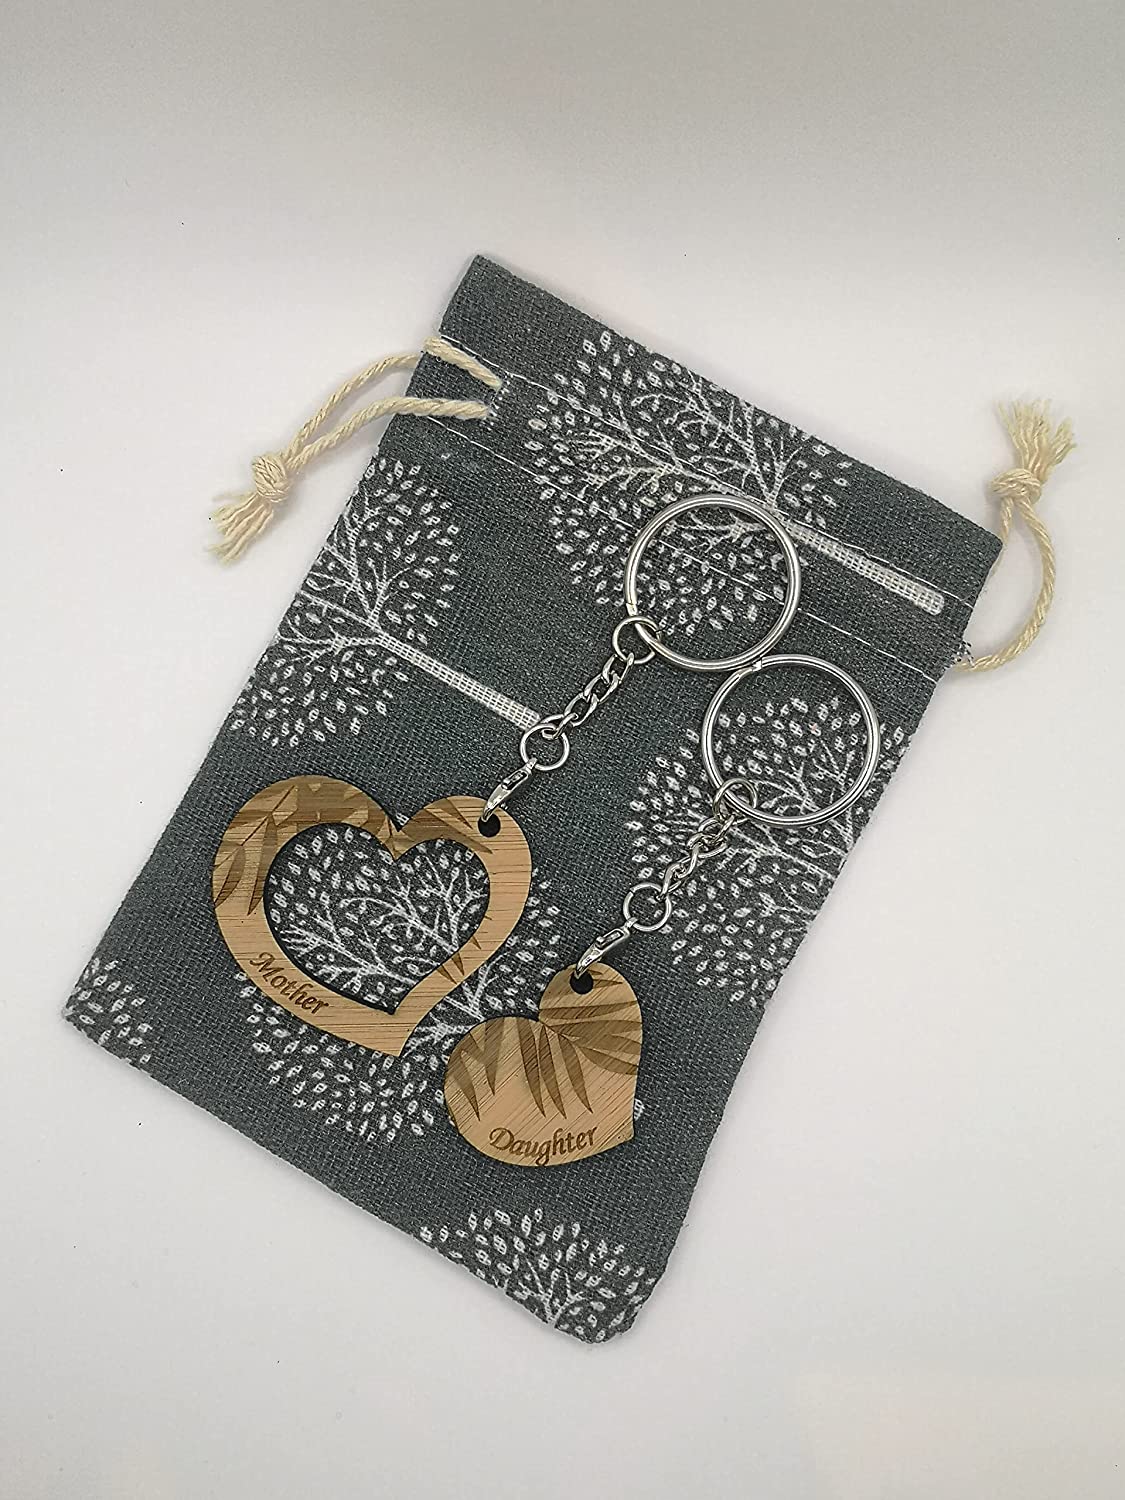 Mother / Daughter Bamboo Love Keychain Set